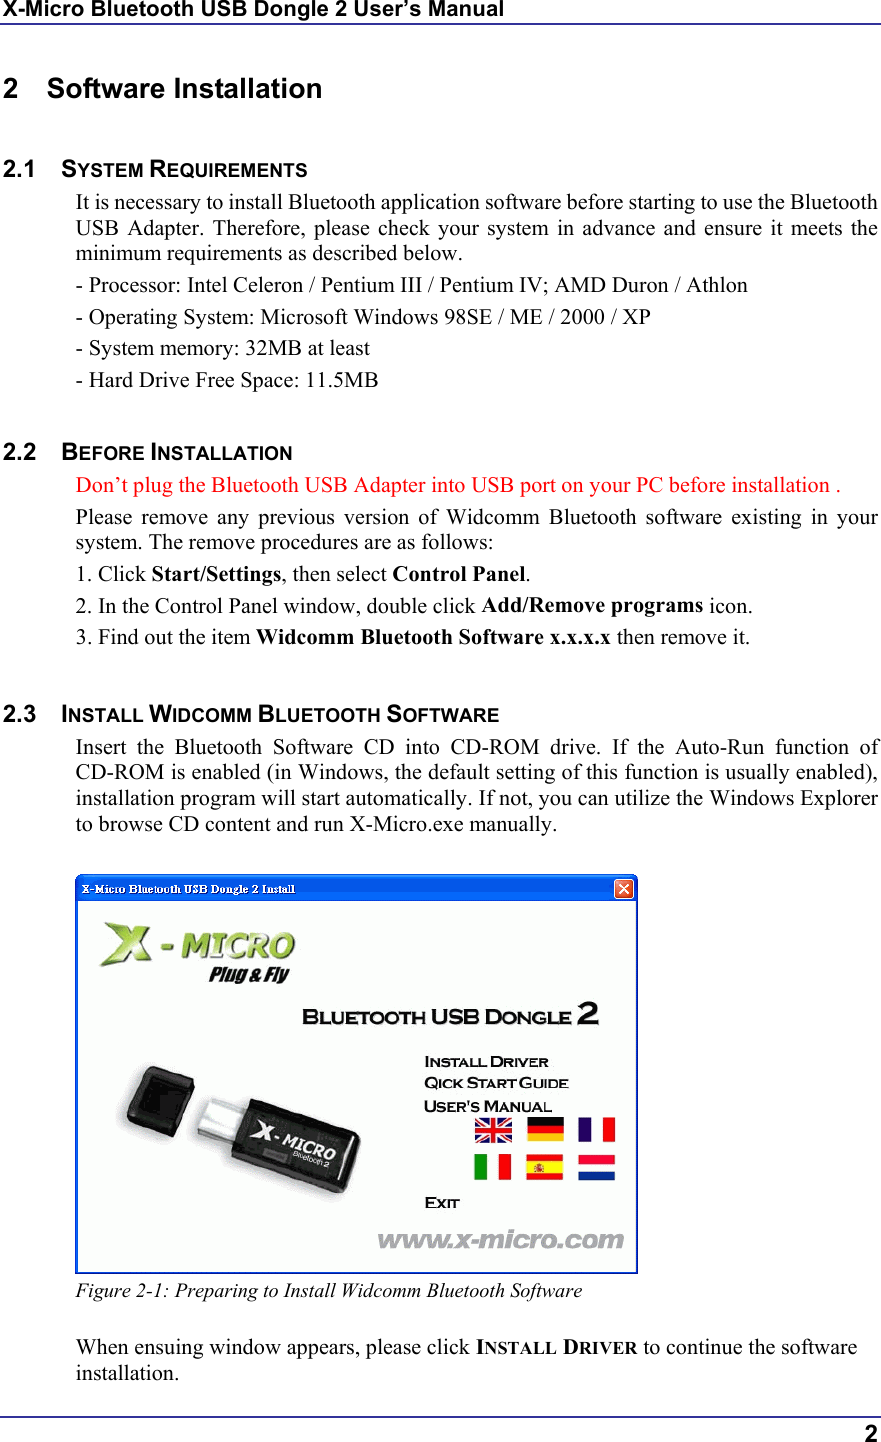 X-Micro Bluetooth USB Dongle 2 User’s Manual  2 2 Software Installation  2.1 SYSTEM REQUIREMENTS It is necessary to install Bluetooth application software before starting to use the Bluetooth USB Adapter. Therefore, please check your system in advance and ensure it meets the minimum requirements as described below. - Processor: Intel Celeron / Pentium III / Pentium IV; AMD Duron / Athlon - Operating System: Microsoft Windows 98SE / ME / 2000 / XP - System memory: 32MB at least - Hard Drive Free Space: 11.5MB  2.2 BEFORE INSTALLATION  Don’t plug the Bluetooth USB Adapter into USB port on your PC before installation . Please remove any previous version of Widcomm Bluetooth software existing in your system. The remove procedures are as follows: 1. Click Start/Settings, then select Control Panel. 2. In the Control Panel window, double click Add/Remove programs icon. 3. Find out the item Widcomm Bluetooth Software x.x.x.x then remove it.  2.3 INSTALL WIDCOMM BLUETOOTH SOFTWARE Insert the Bluetooth Software CD into CD-ROM drive. If the Auto-Run function of CD-ROM is enabled (in Windows, the default setting of this function is usually enabled), installation program will start automatically. If not, you can utilize the Windows Explorer to browse CD content and run X-Micro.exe manually.   Figure 2-1: Preparing to Install Widcomm Bluetooth Software  When ensuing window appears, please click INSTALL DRIVER to continue the software installation. 